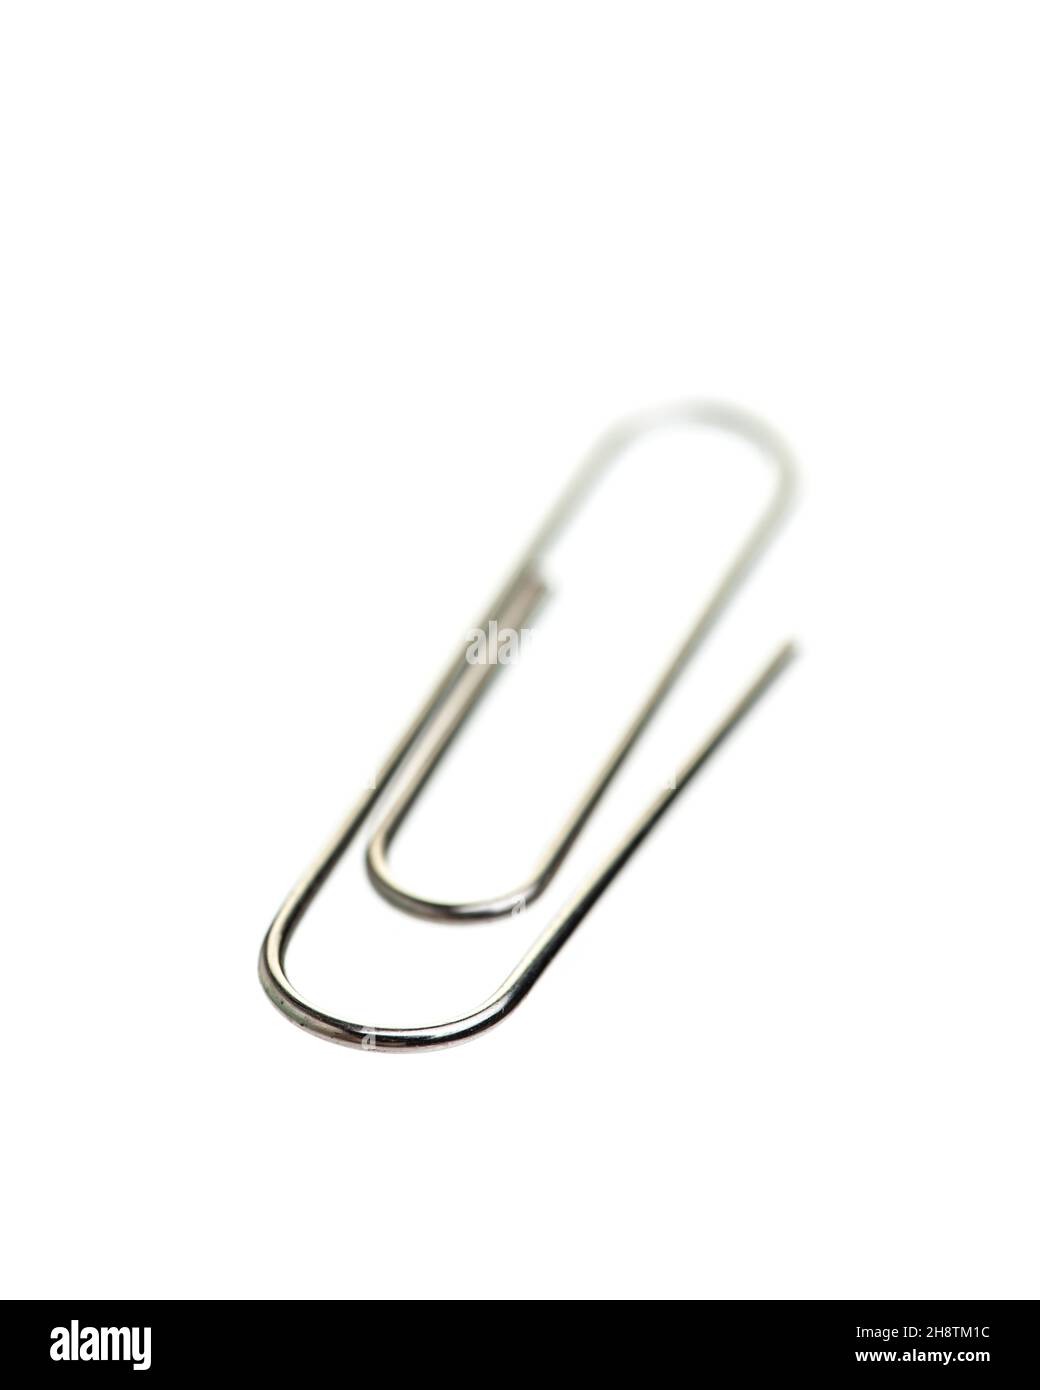 Paper clip isolated on white background Stock Photo